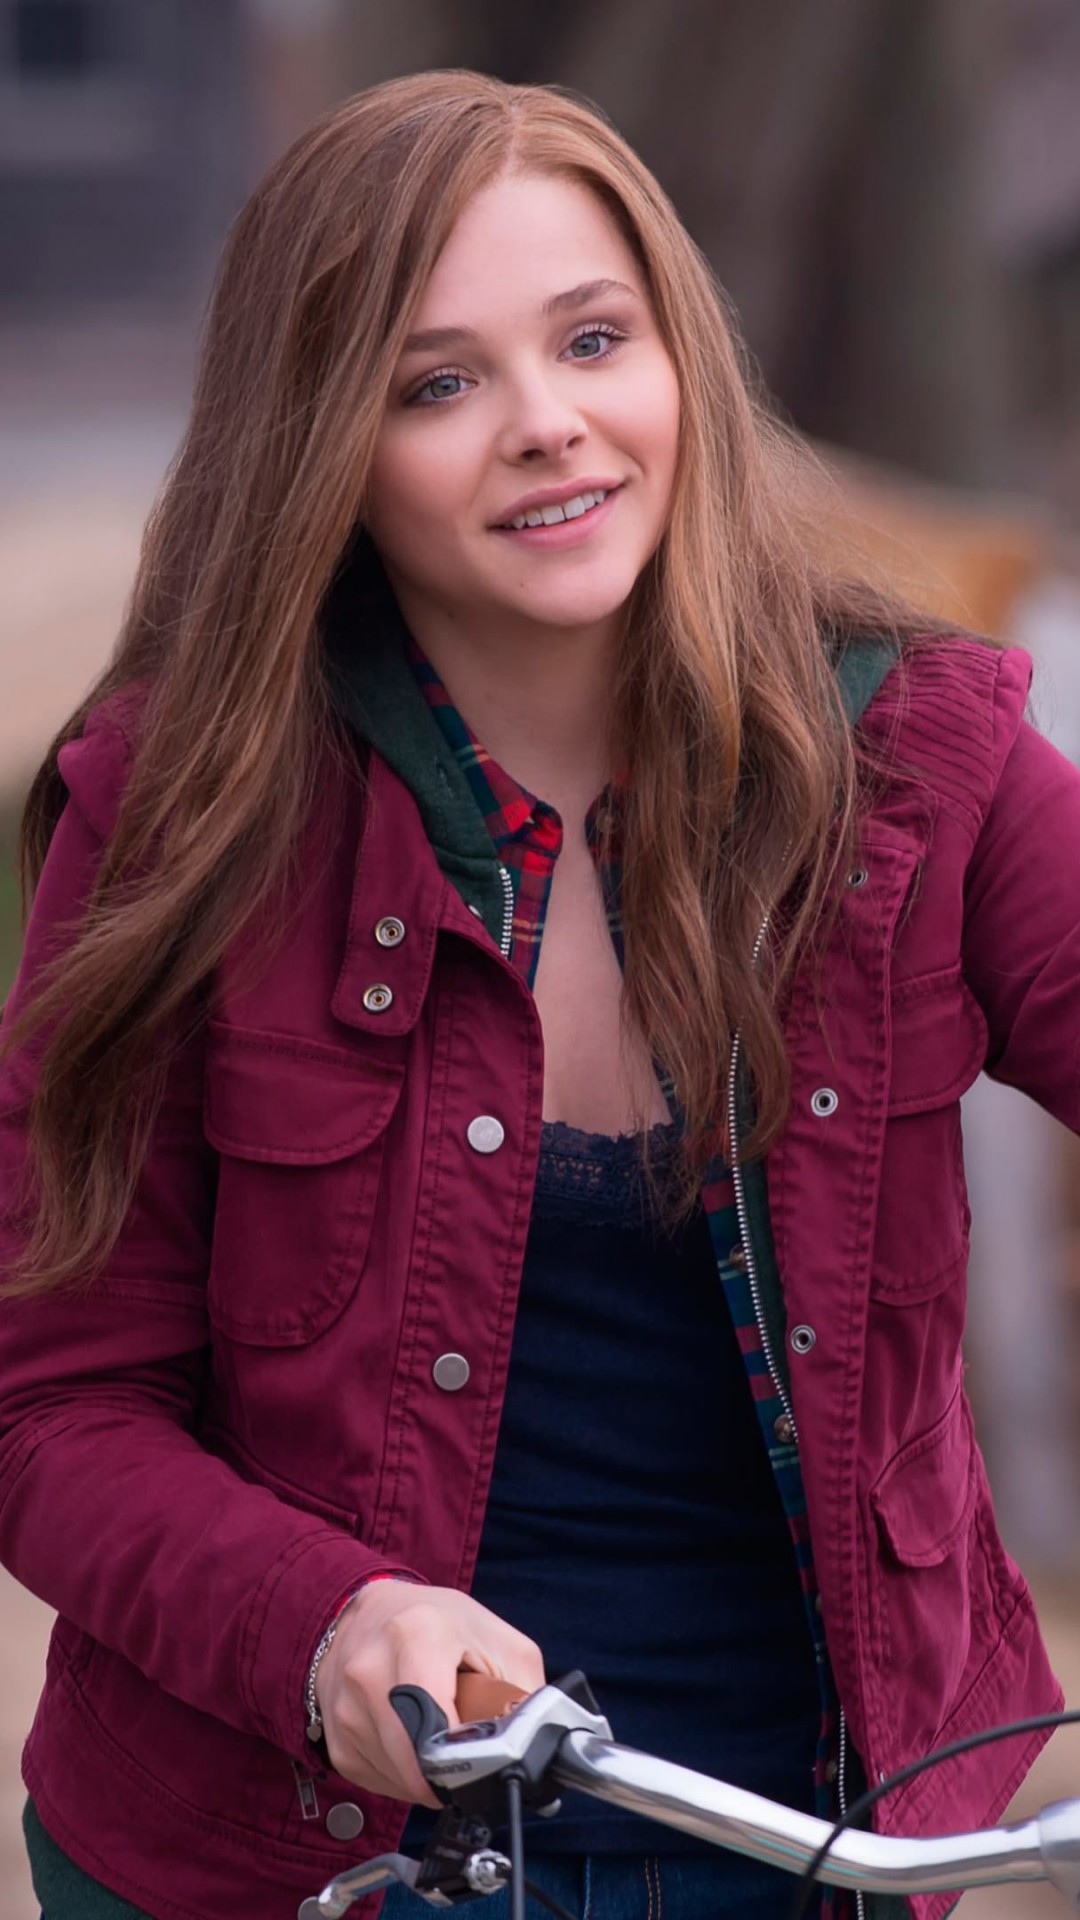 Chloe Grace Moretz in "If I Stay" Wallpaper for SAMSUNG Galaxy S4